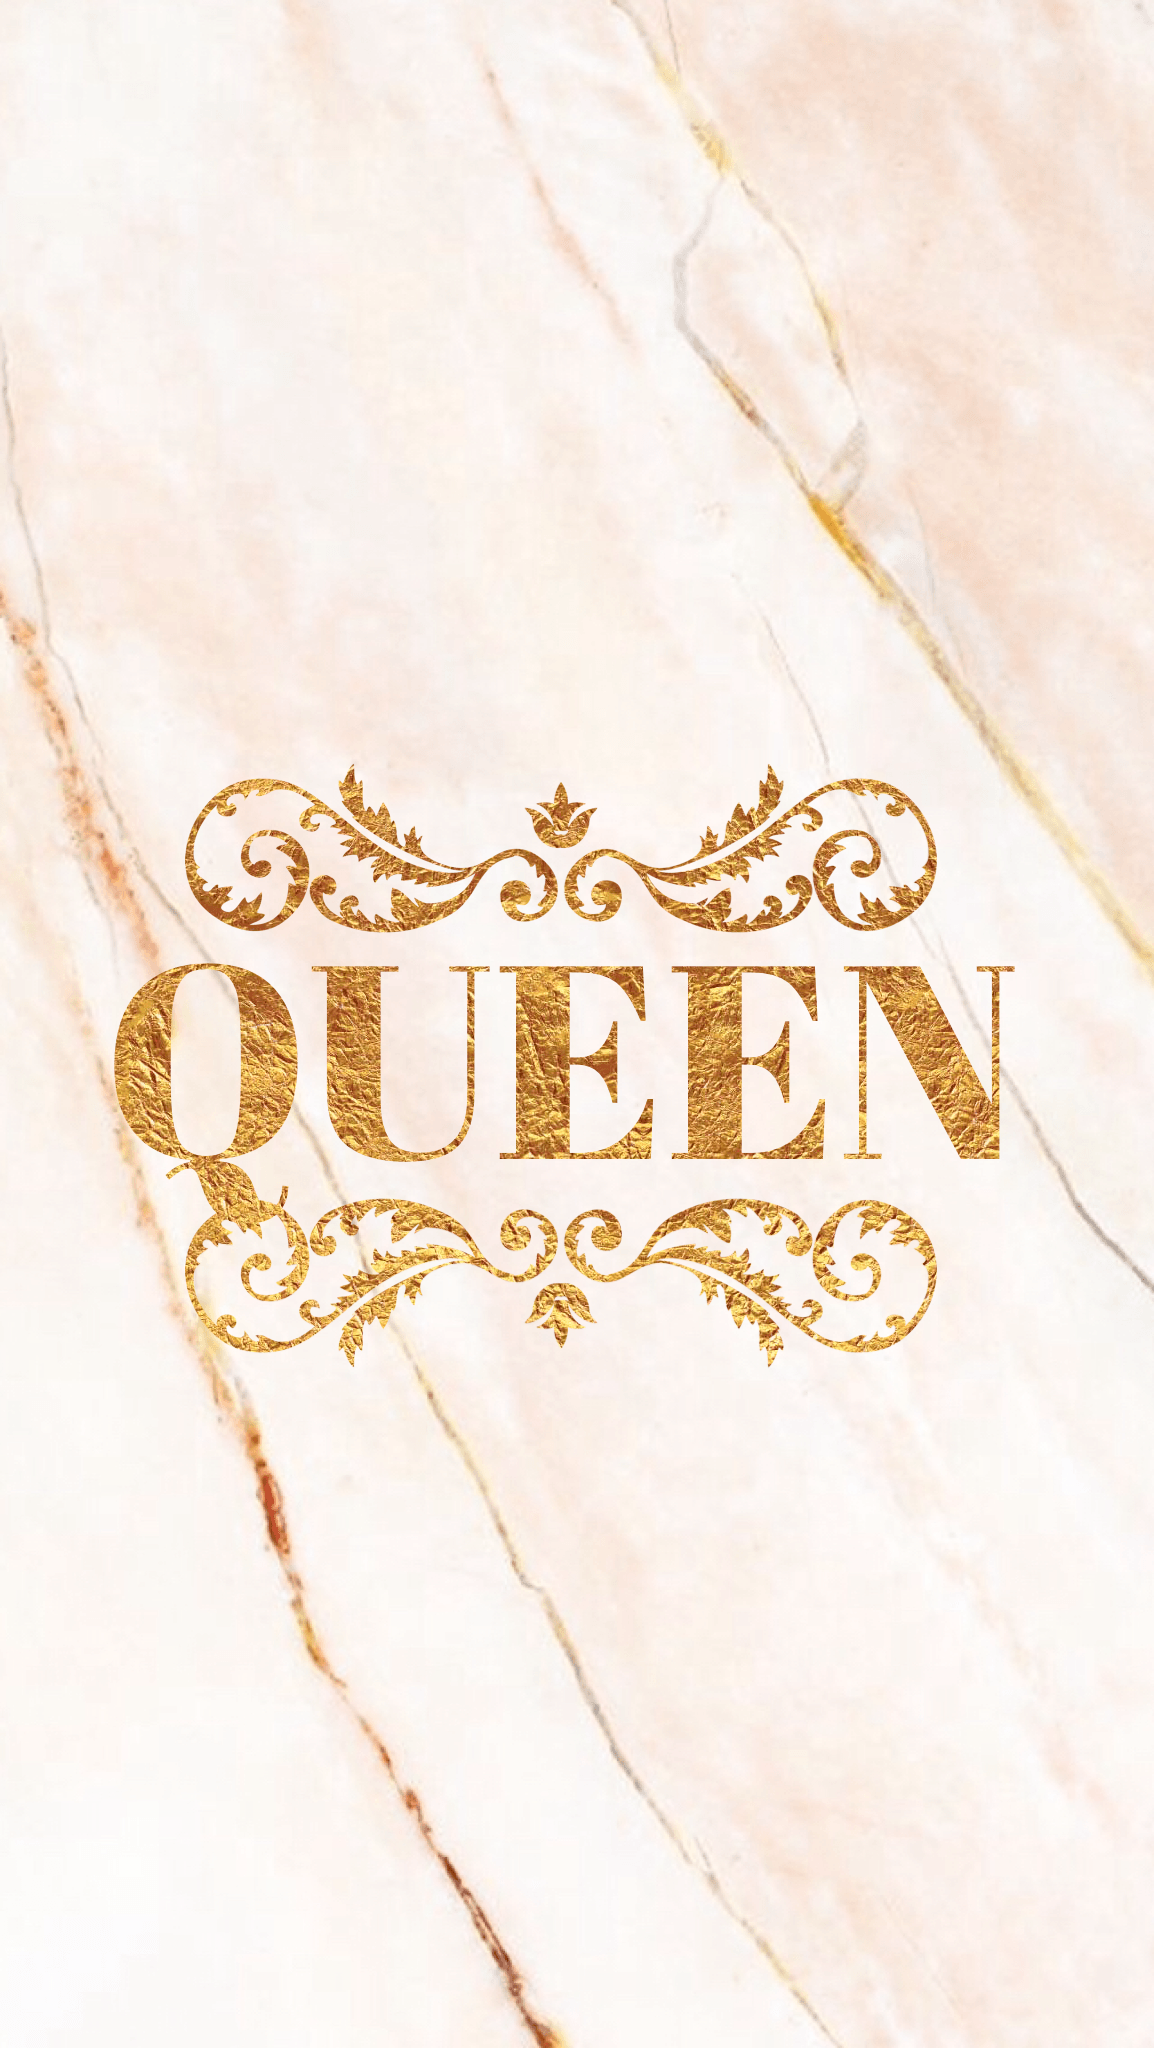 Download Queen Wallpaper by SimonTronoz  57  Free on ZEDGE now Browse  millions of popular design Wallpape  Queens wallpaper Crown tattoo  design Queen tattoo